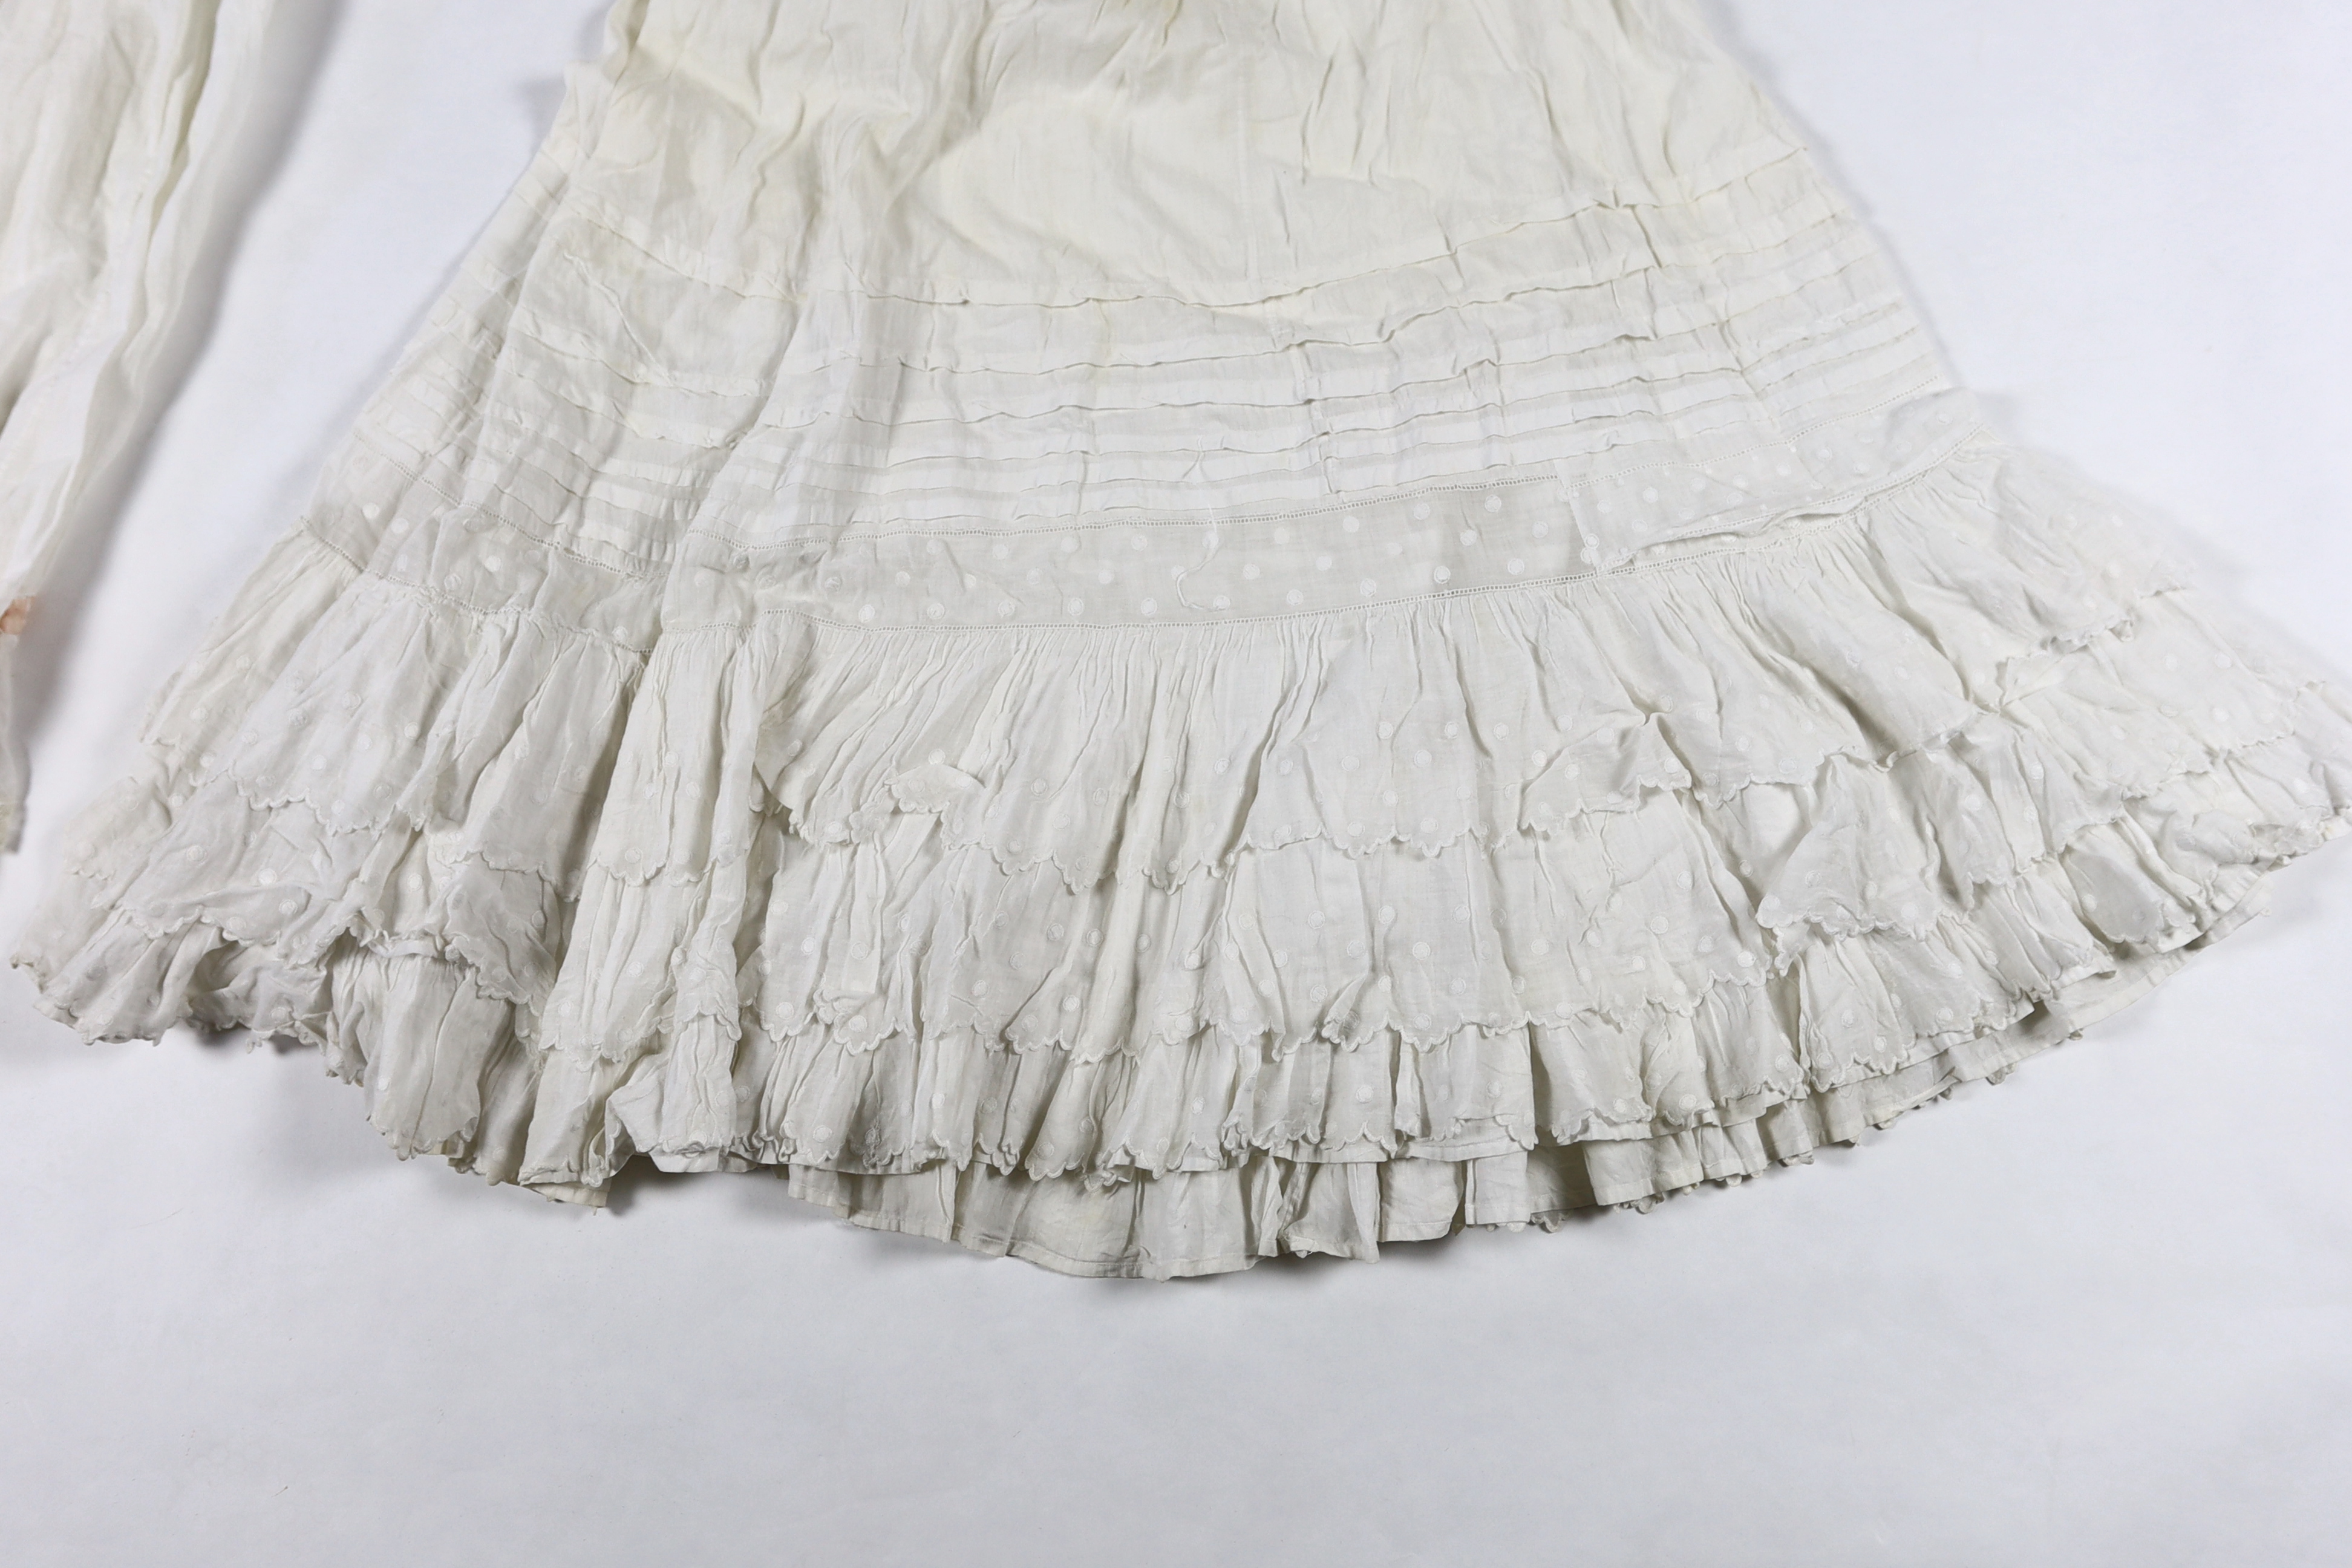 Three Victorian white worked petticoats; one two tiered, one lace trimmed with ribboning, the third worked with cutwork border, all approx. 94cm long